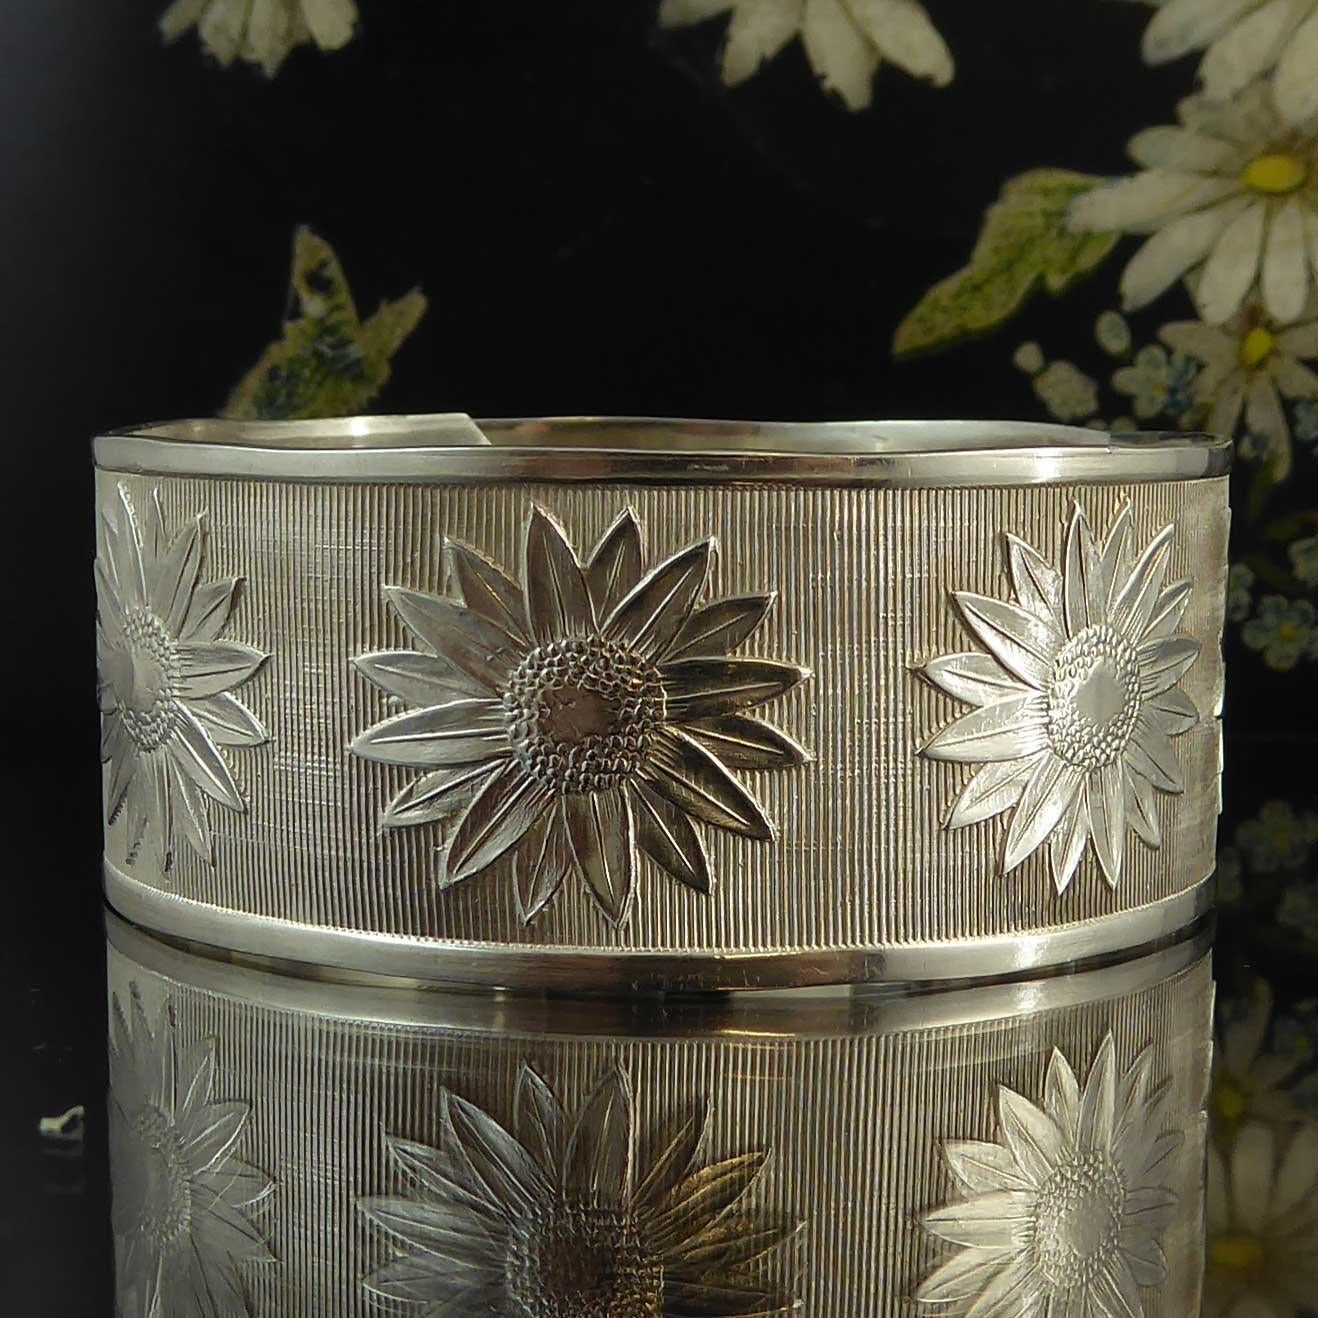 1940s Silver Buckle Bangle, Daisy Flower Pattern, Adjustable, Hallmarked Chester 1